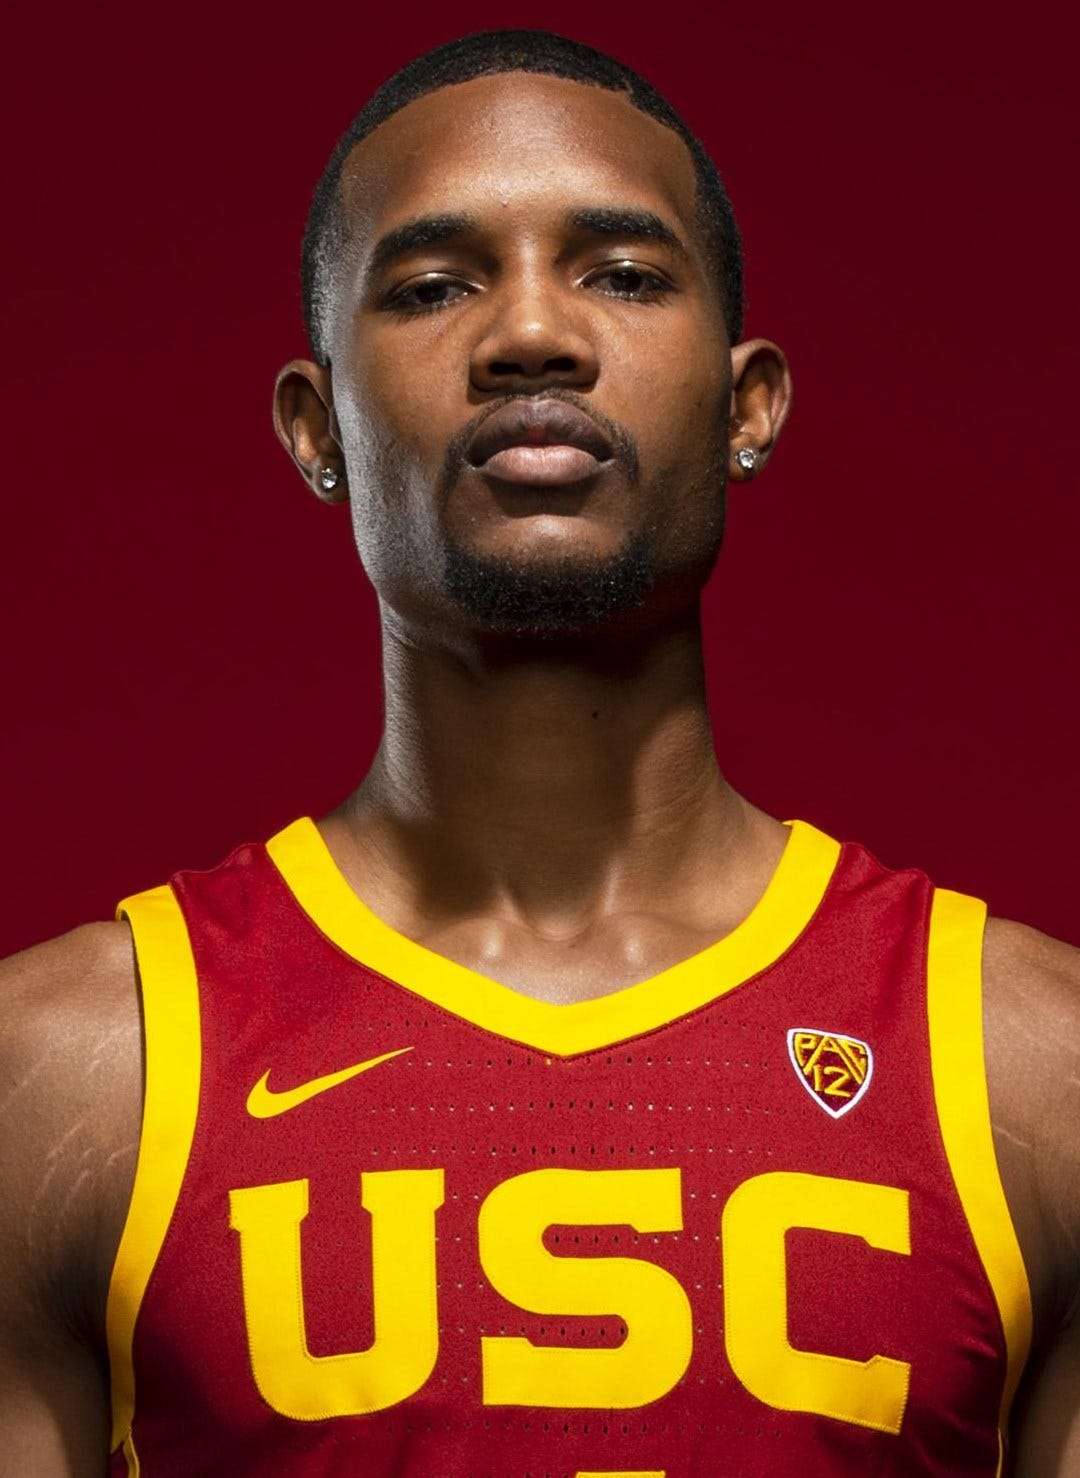 2021 NBA Draft Scouting Report: C Evan Mobley - Pro Sports Outlook